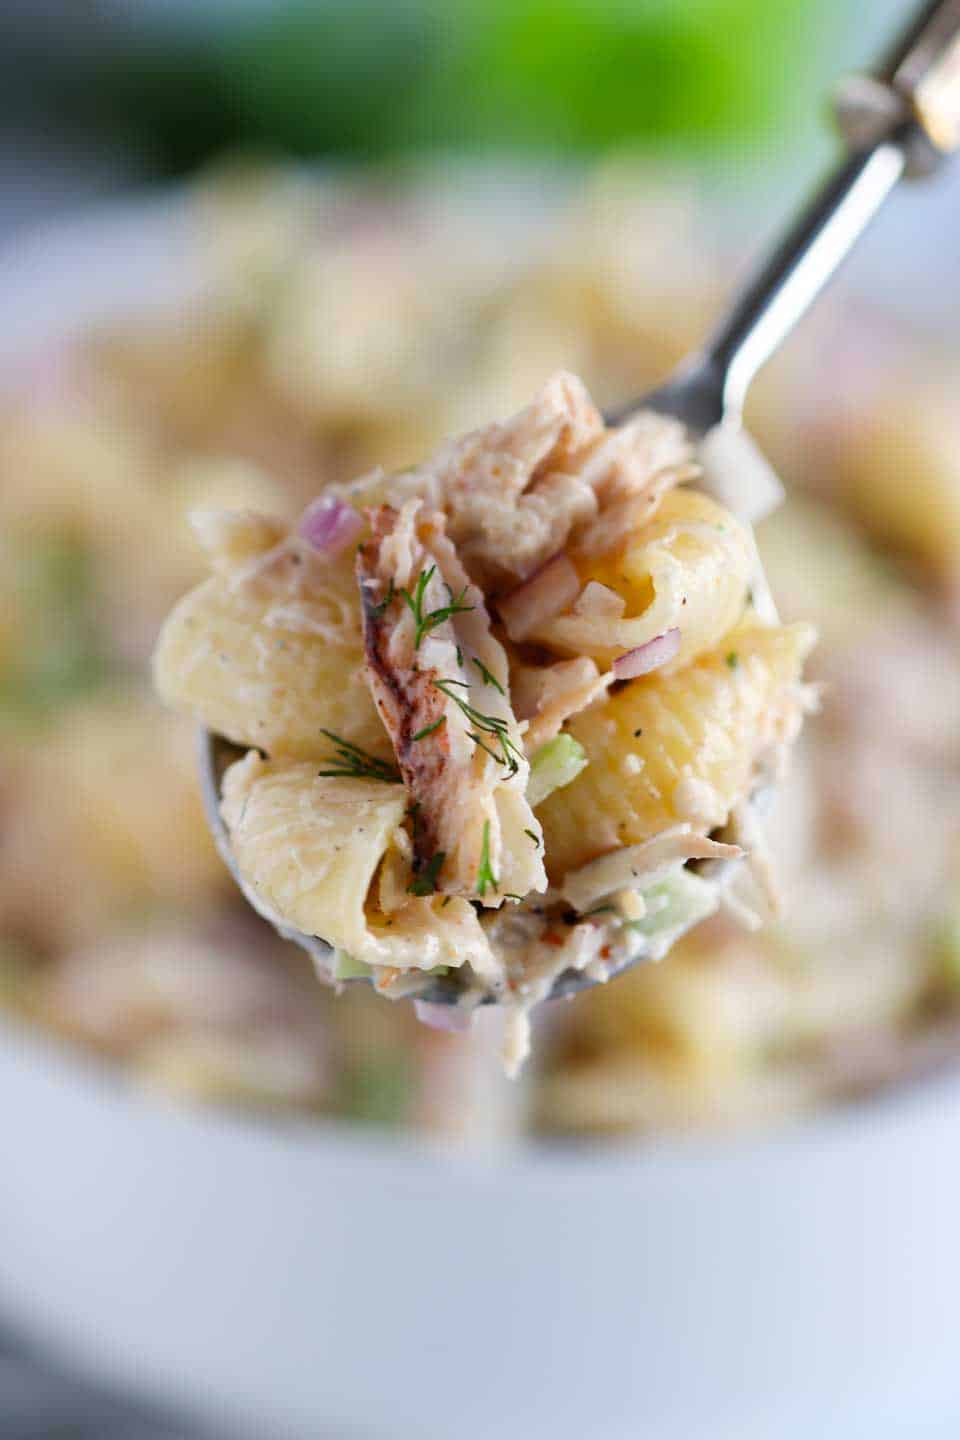 up close image of pasta salad with crab, herbs and onions on a spoon.